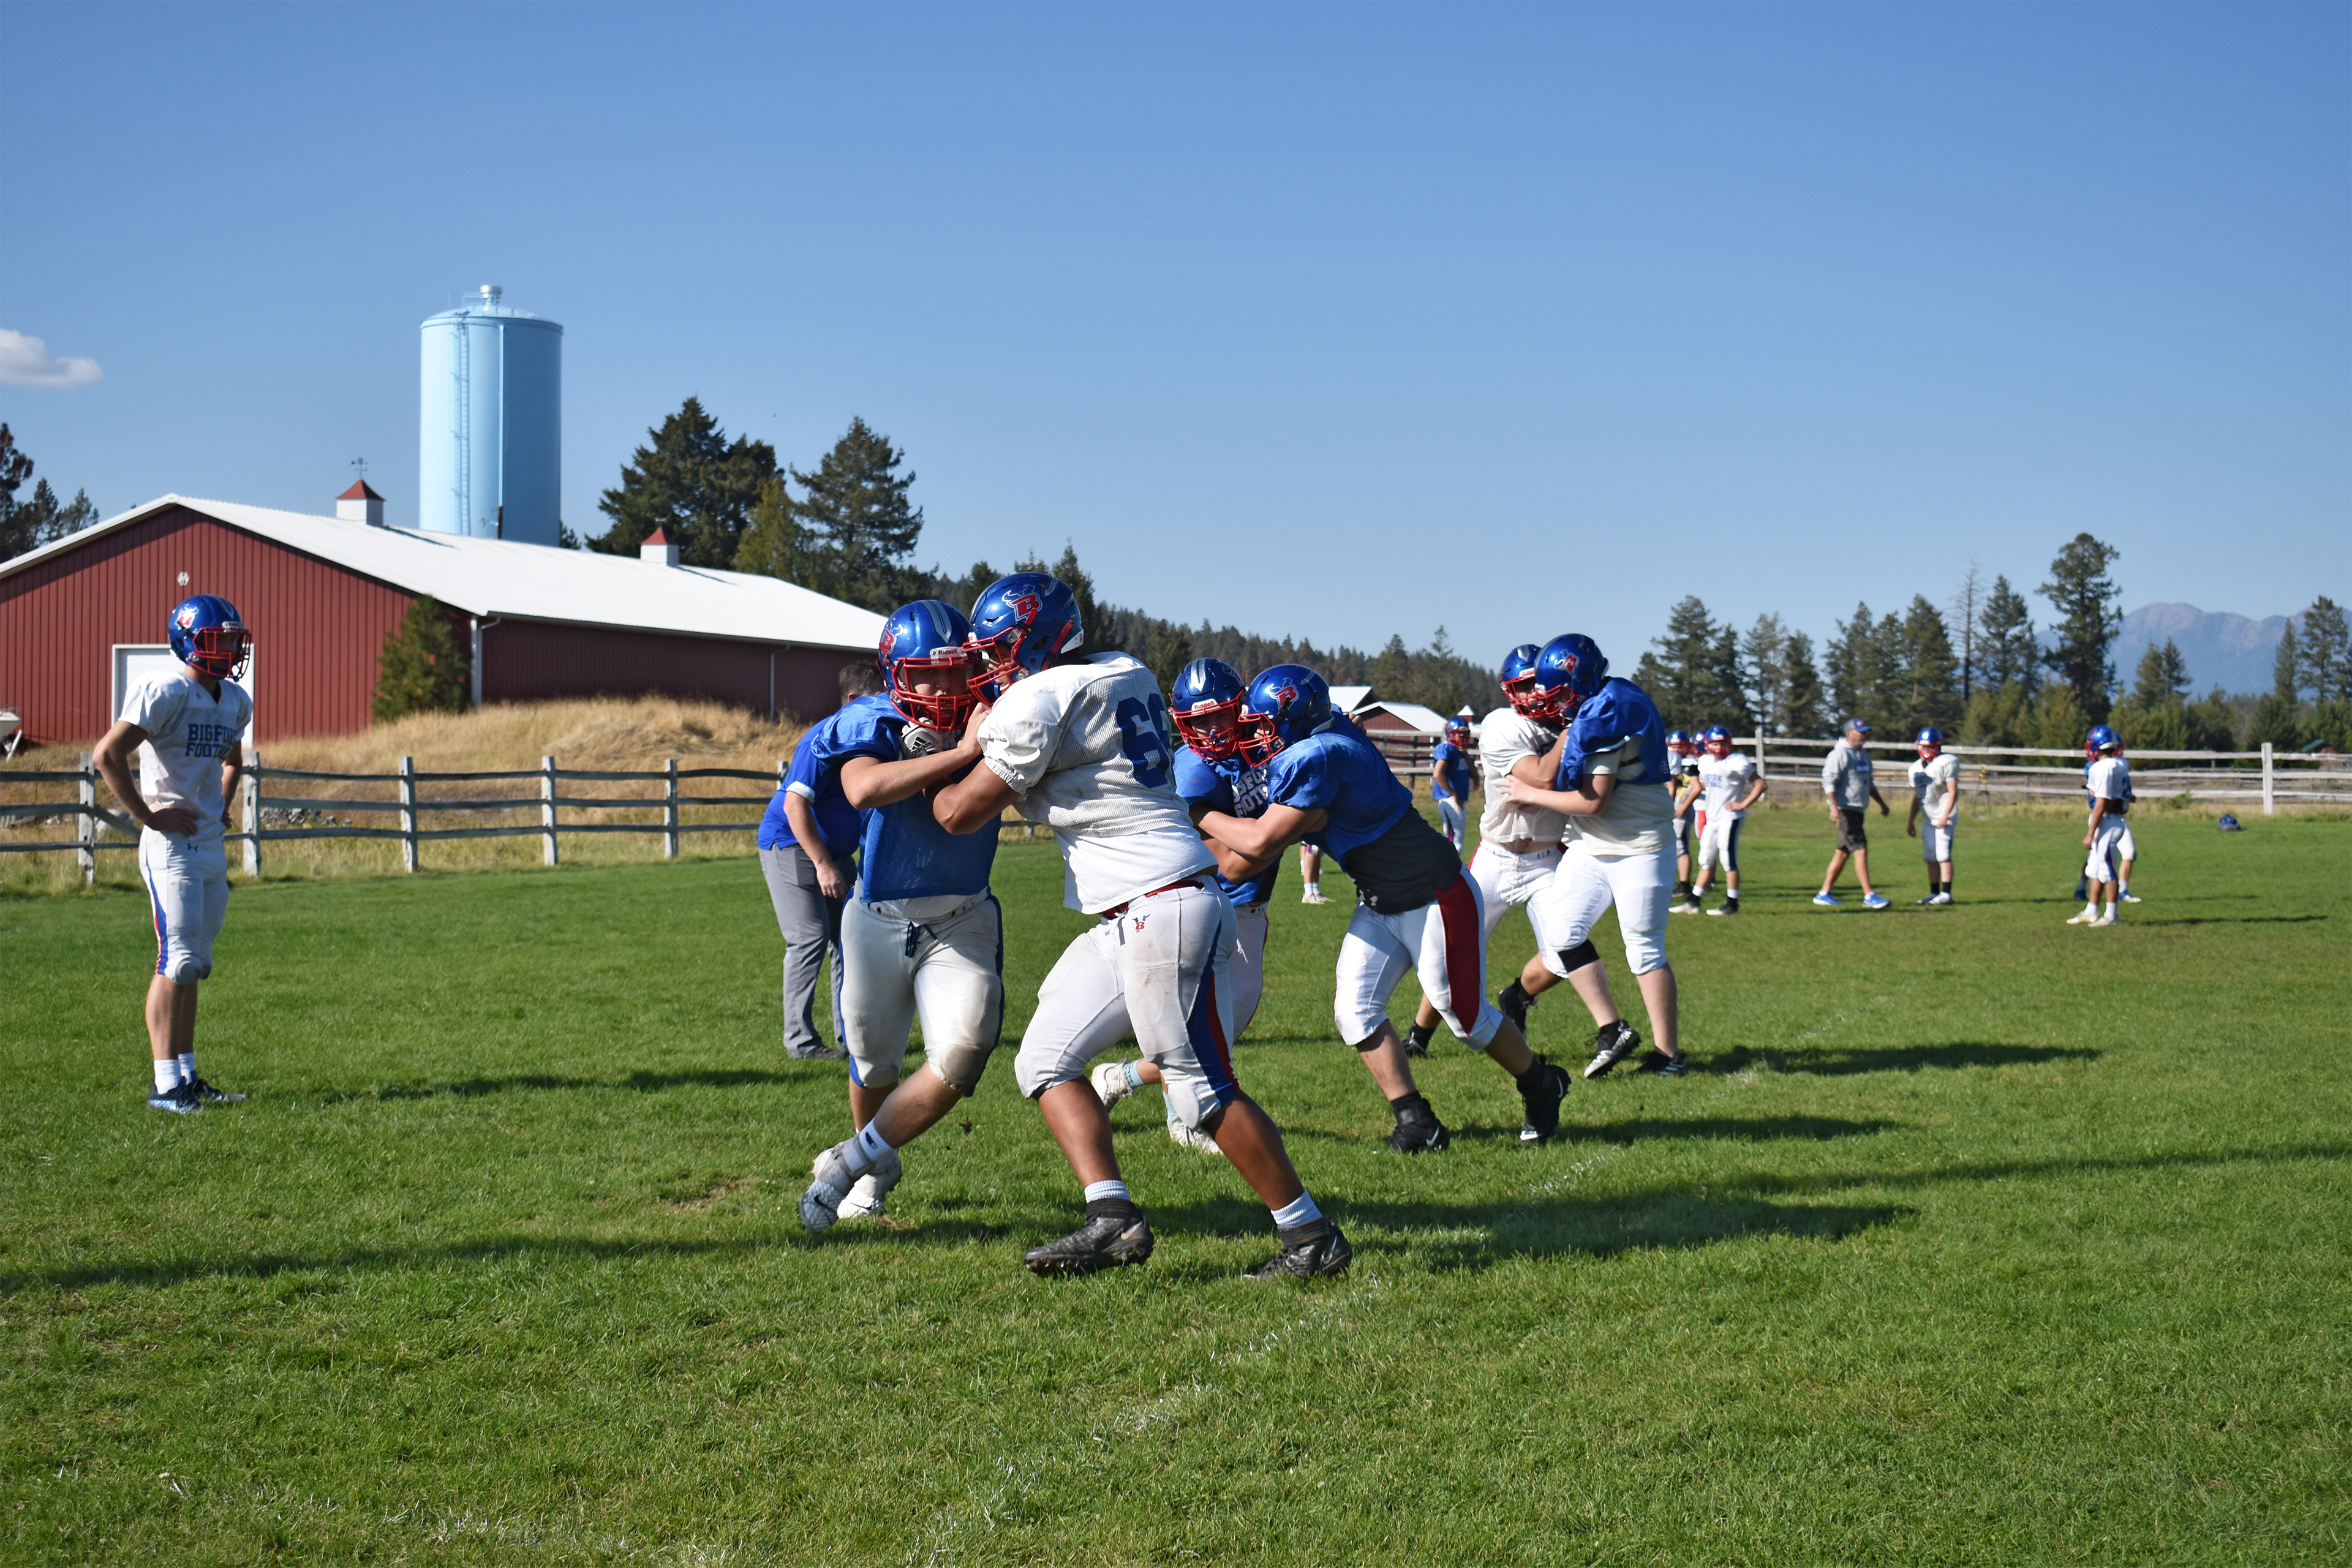 Sports Programs in States in Northern Climes Face a New Opponent: Scorching Septembers